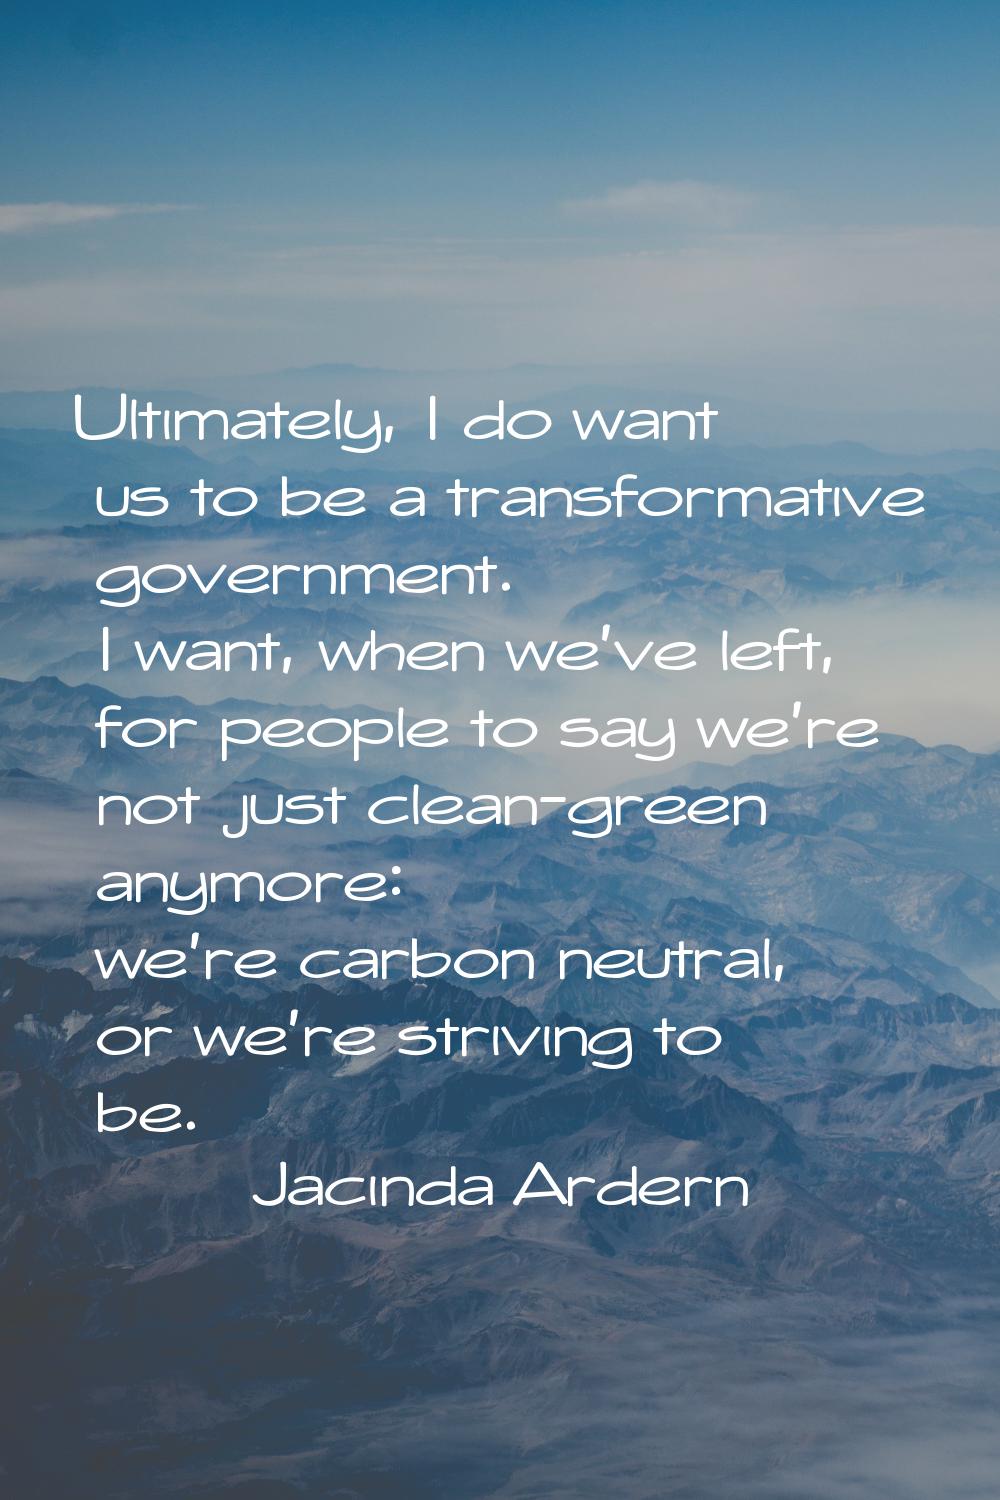 Ultimately, I do want us to be a transformative government. I want, when we've left, for people to 